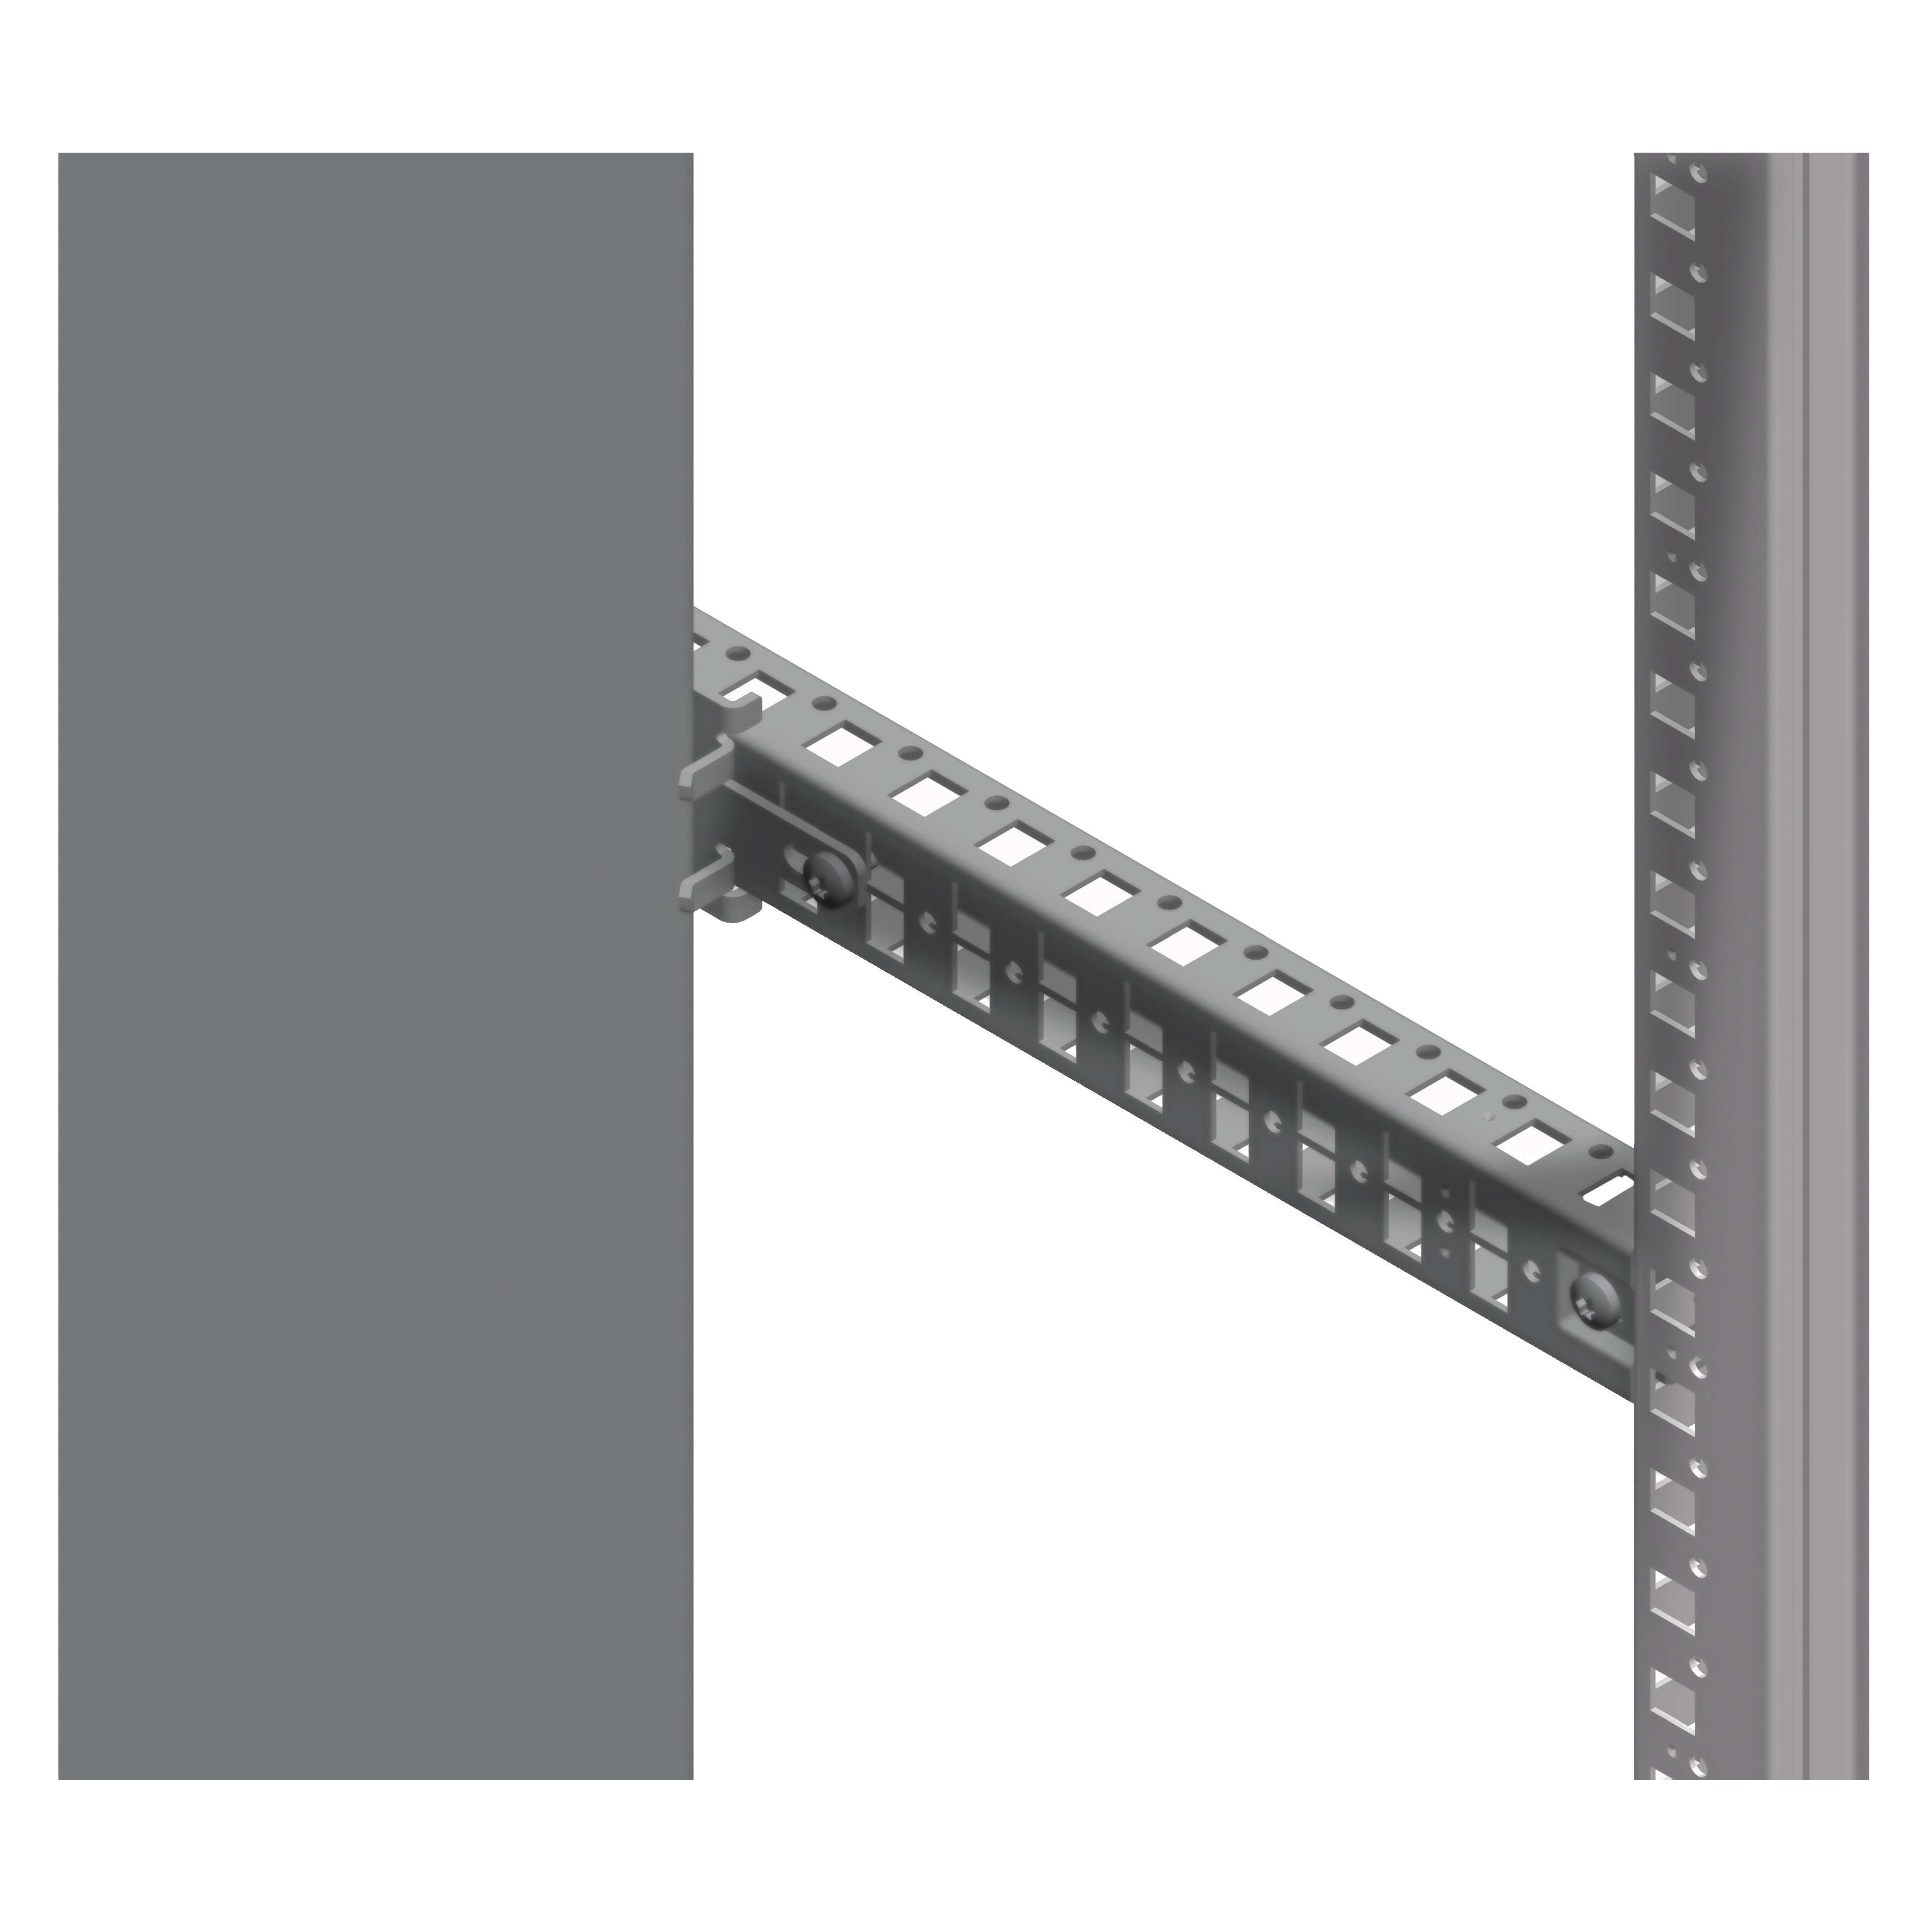 Intermediate fixing supports for mounting plate in advanced position, PanelSeT SFN, Spacial SF, steel